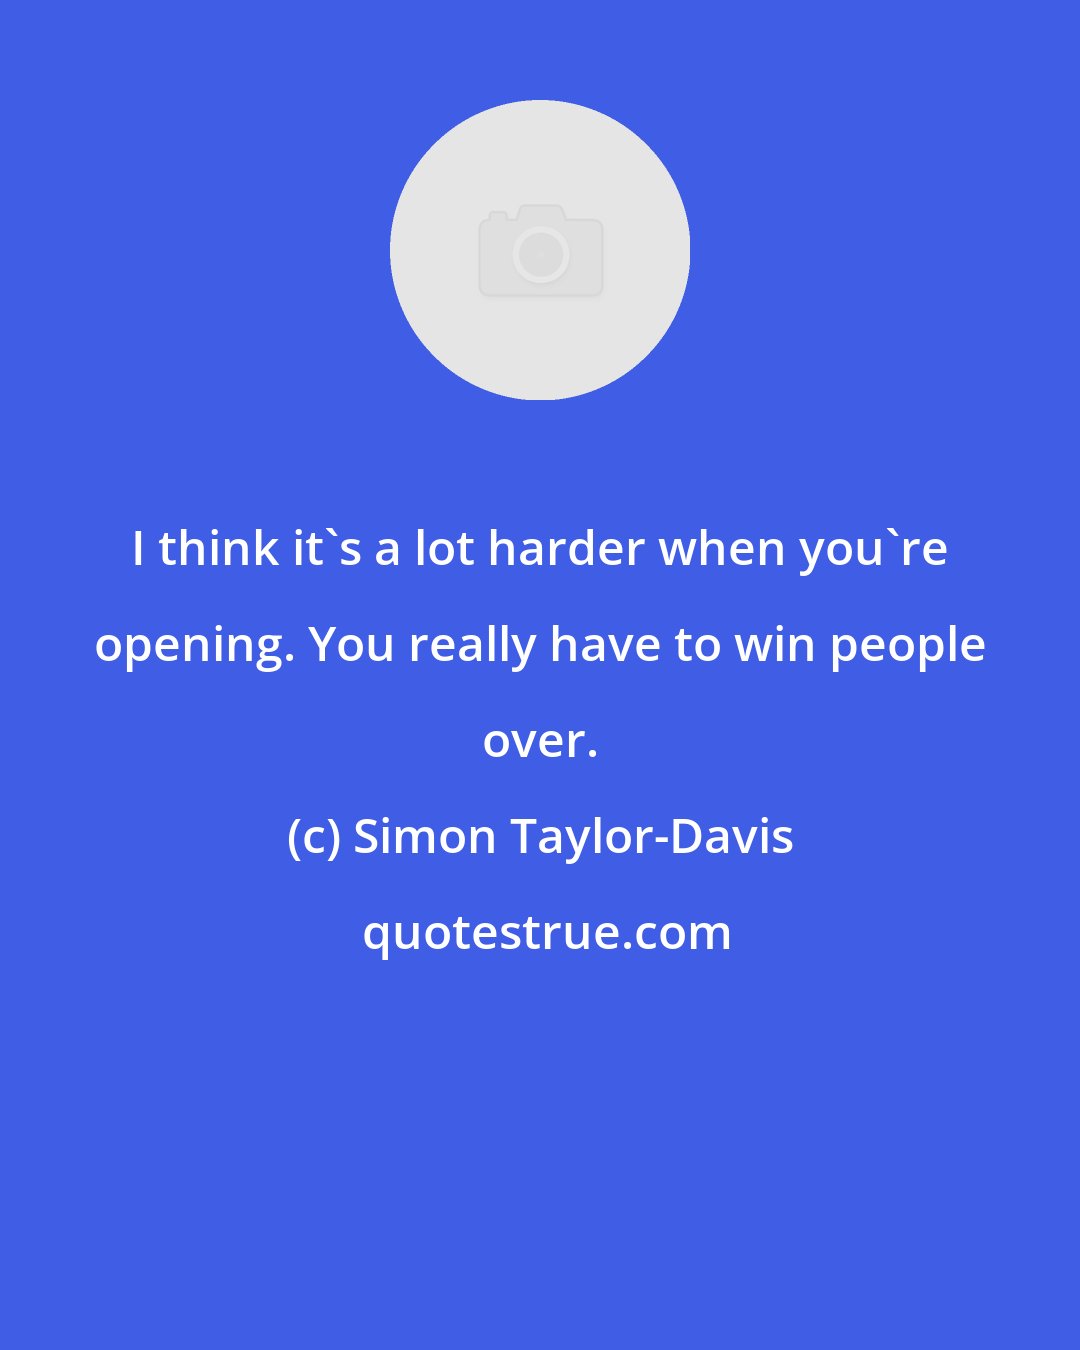 Simon Taylor-Davis: I think it's a lot harder when you're opening. You really have to win people over.